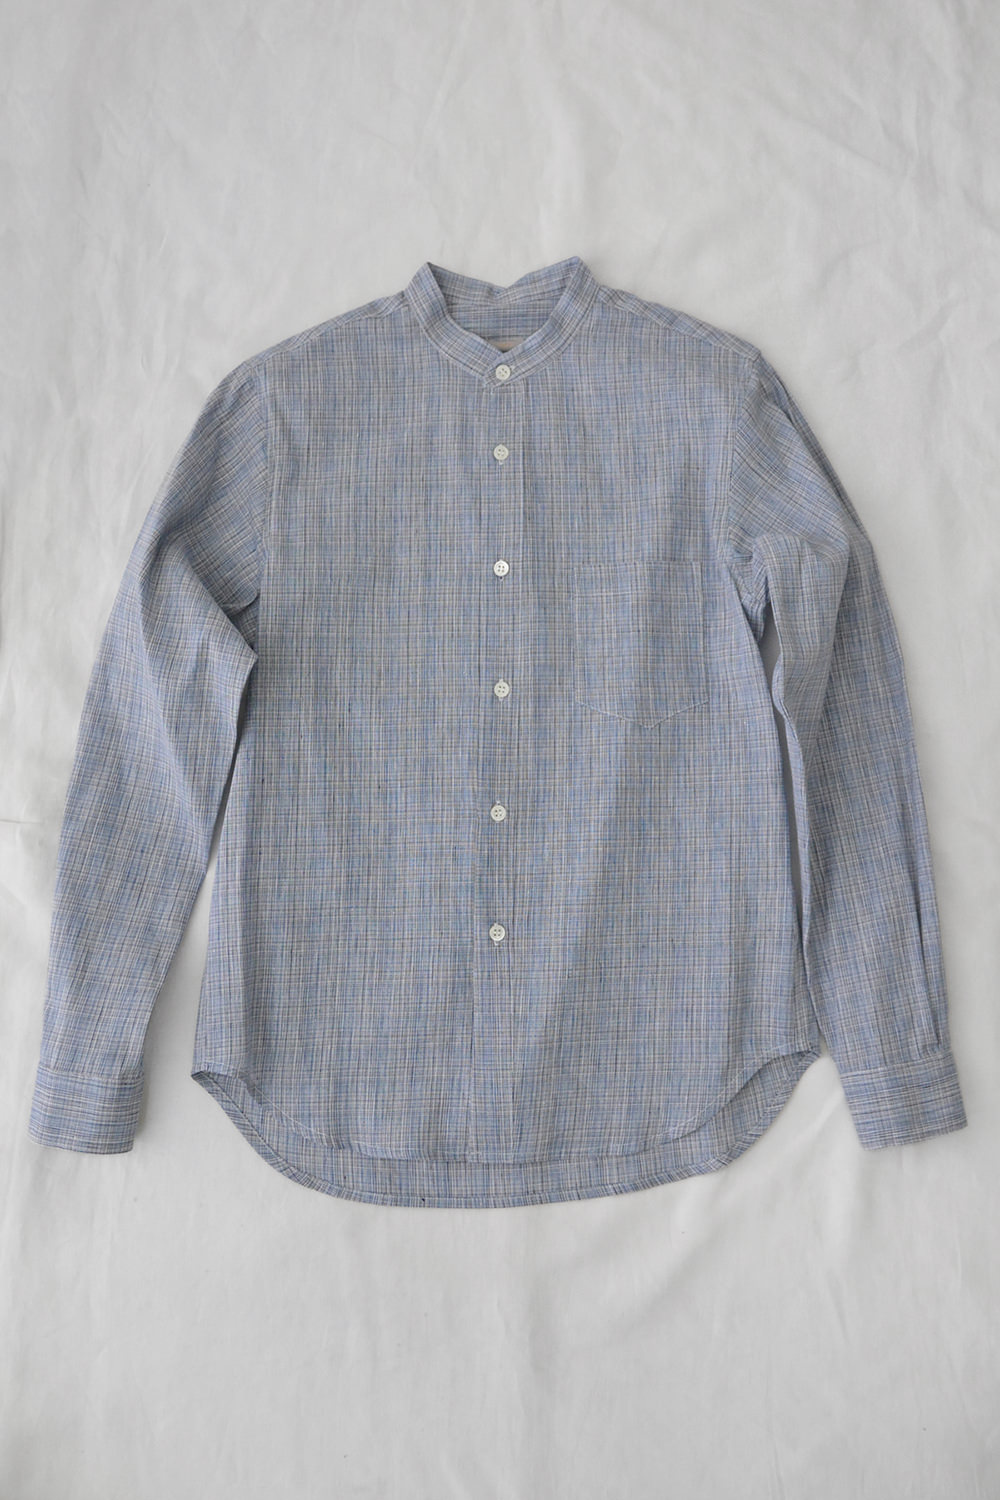 Stand Collar Shirt Gray Check Top Picture